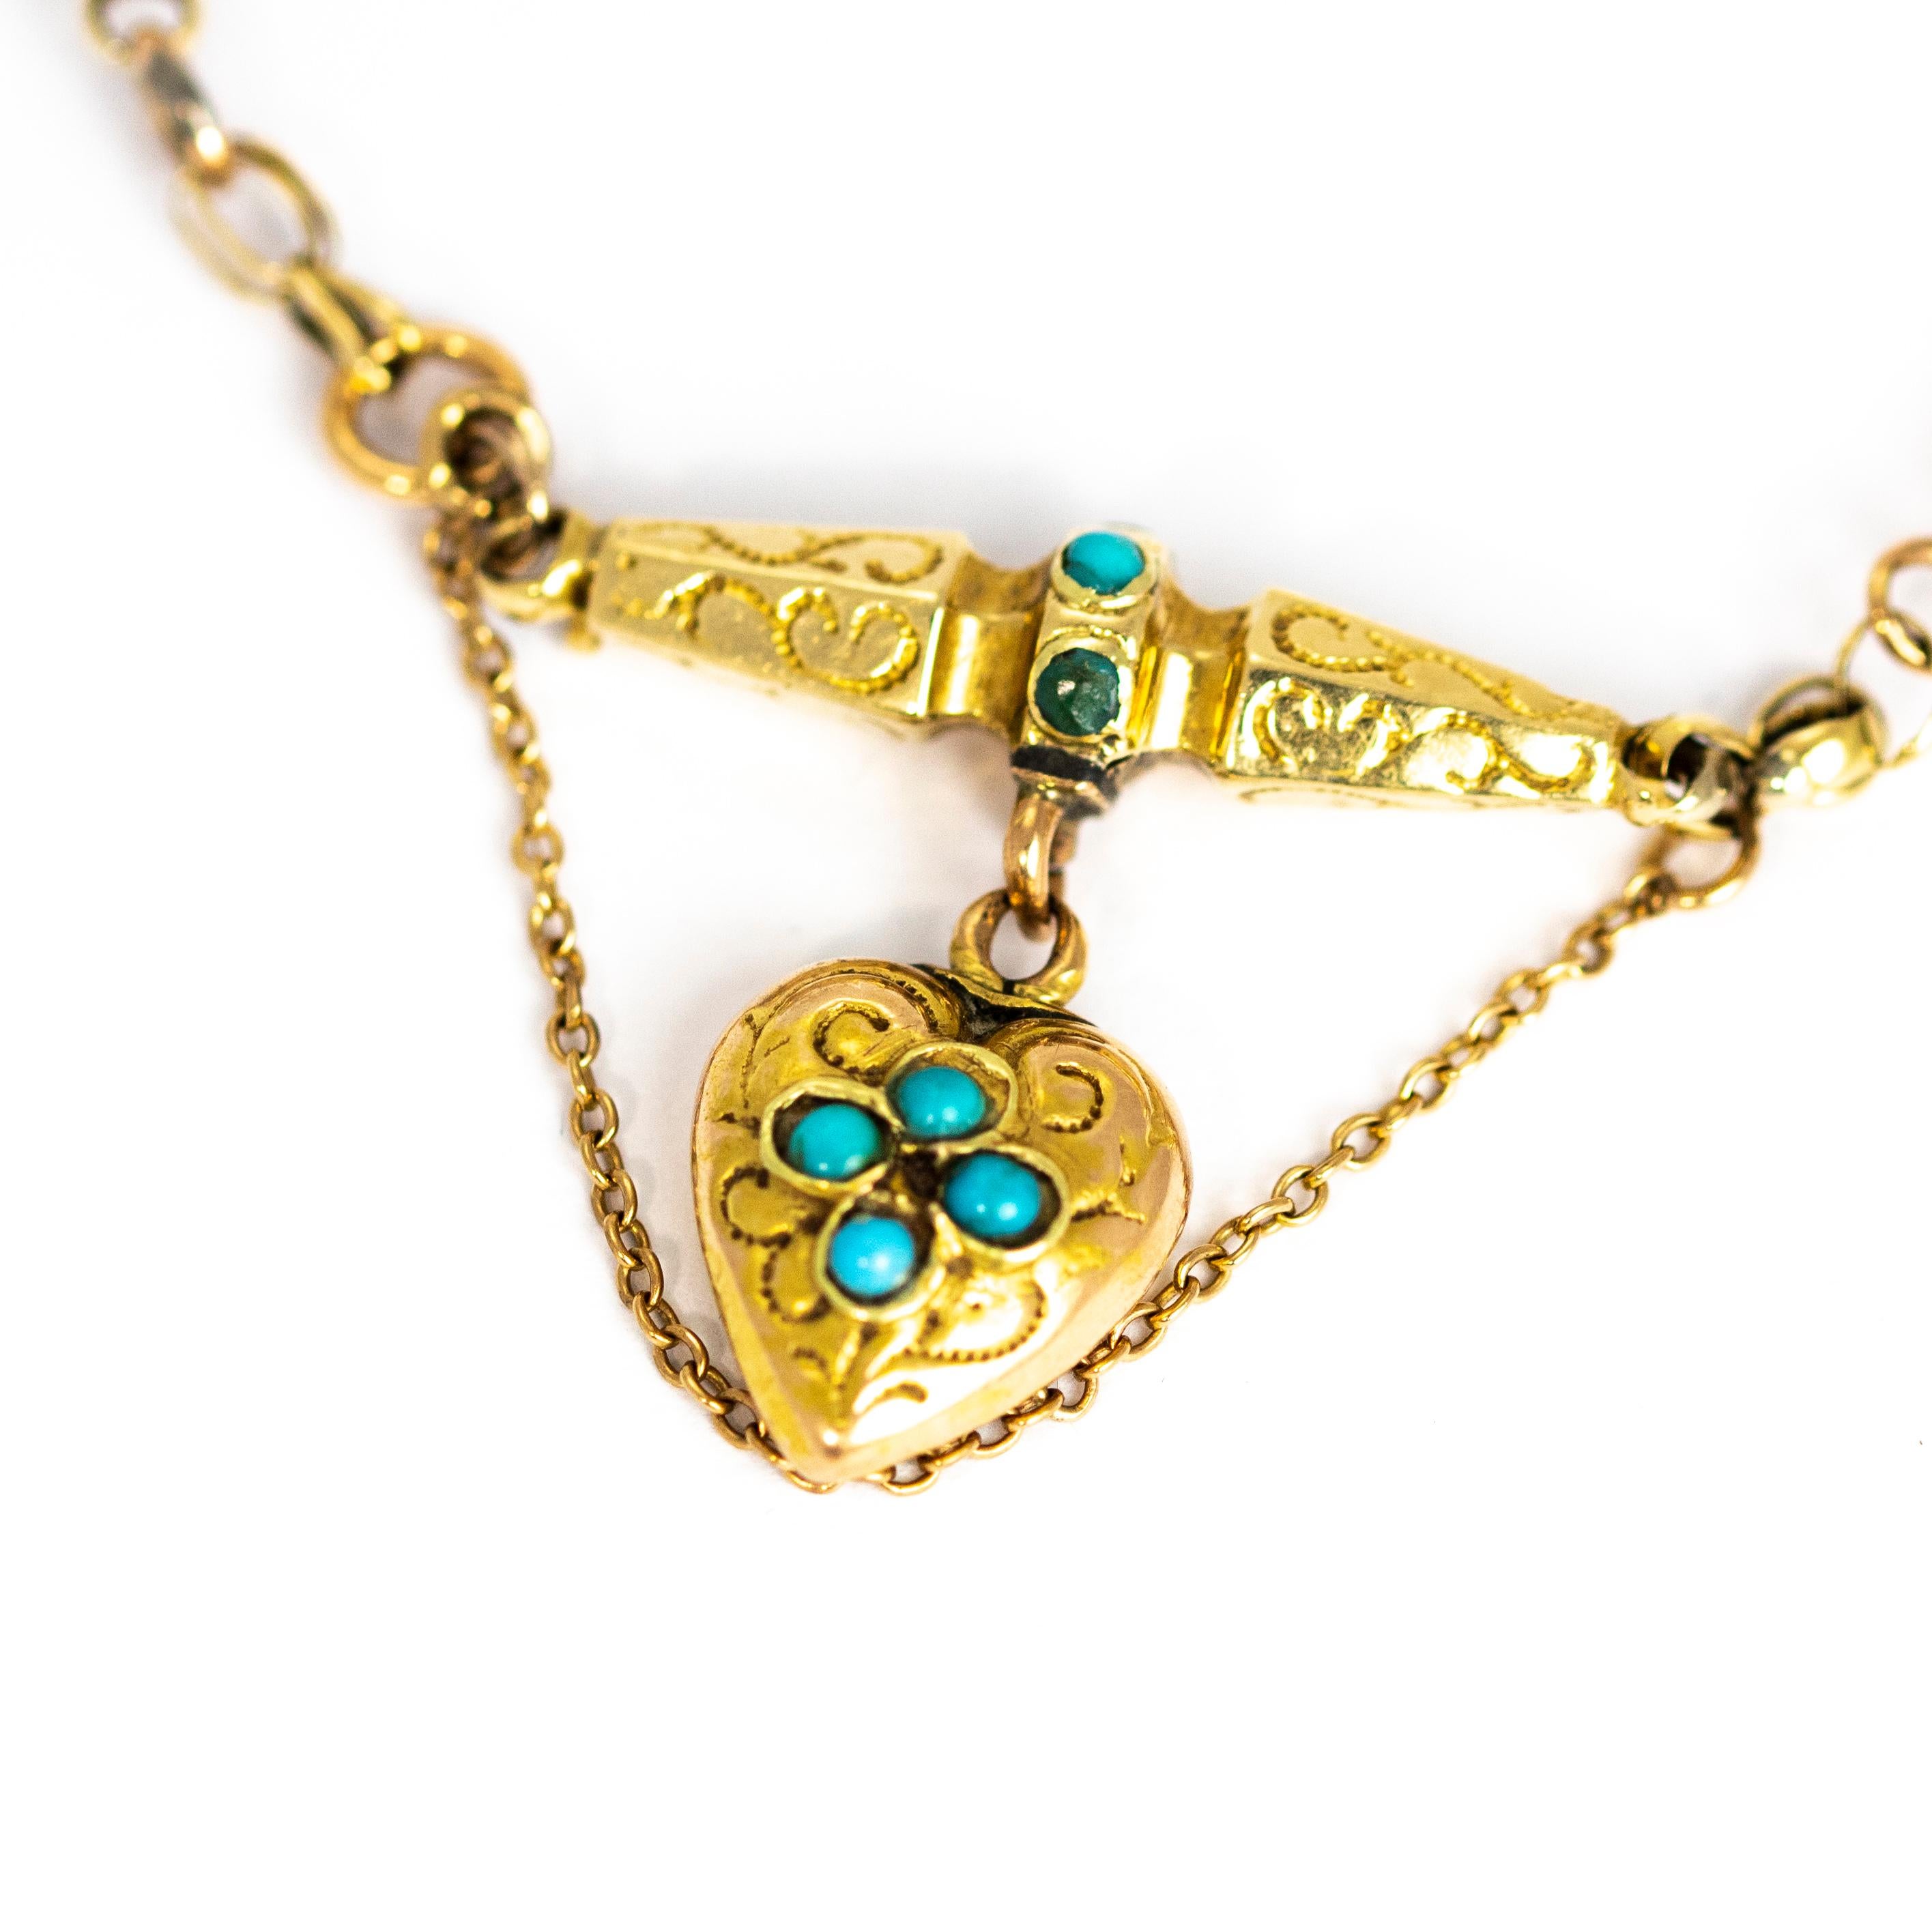 This charming heart pendant bracelet is full of detail. The large decorative links are delicately engraved and the main attraction is the heart pendant that hangs from one of these links. The heart id decorated with turquoise stones and more